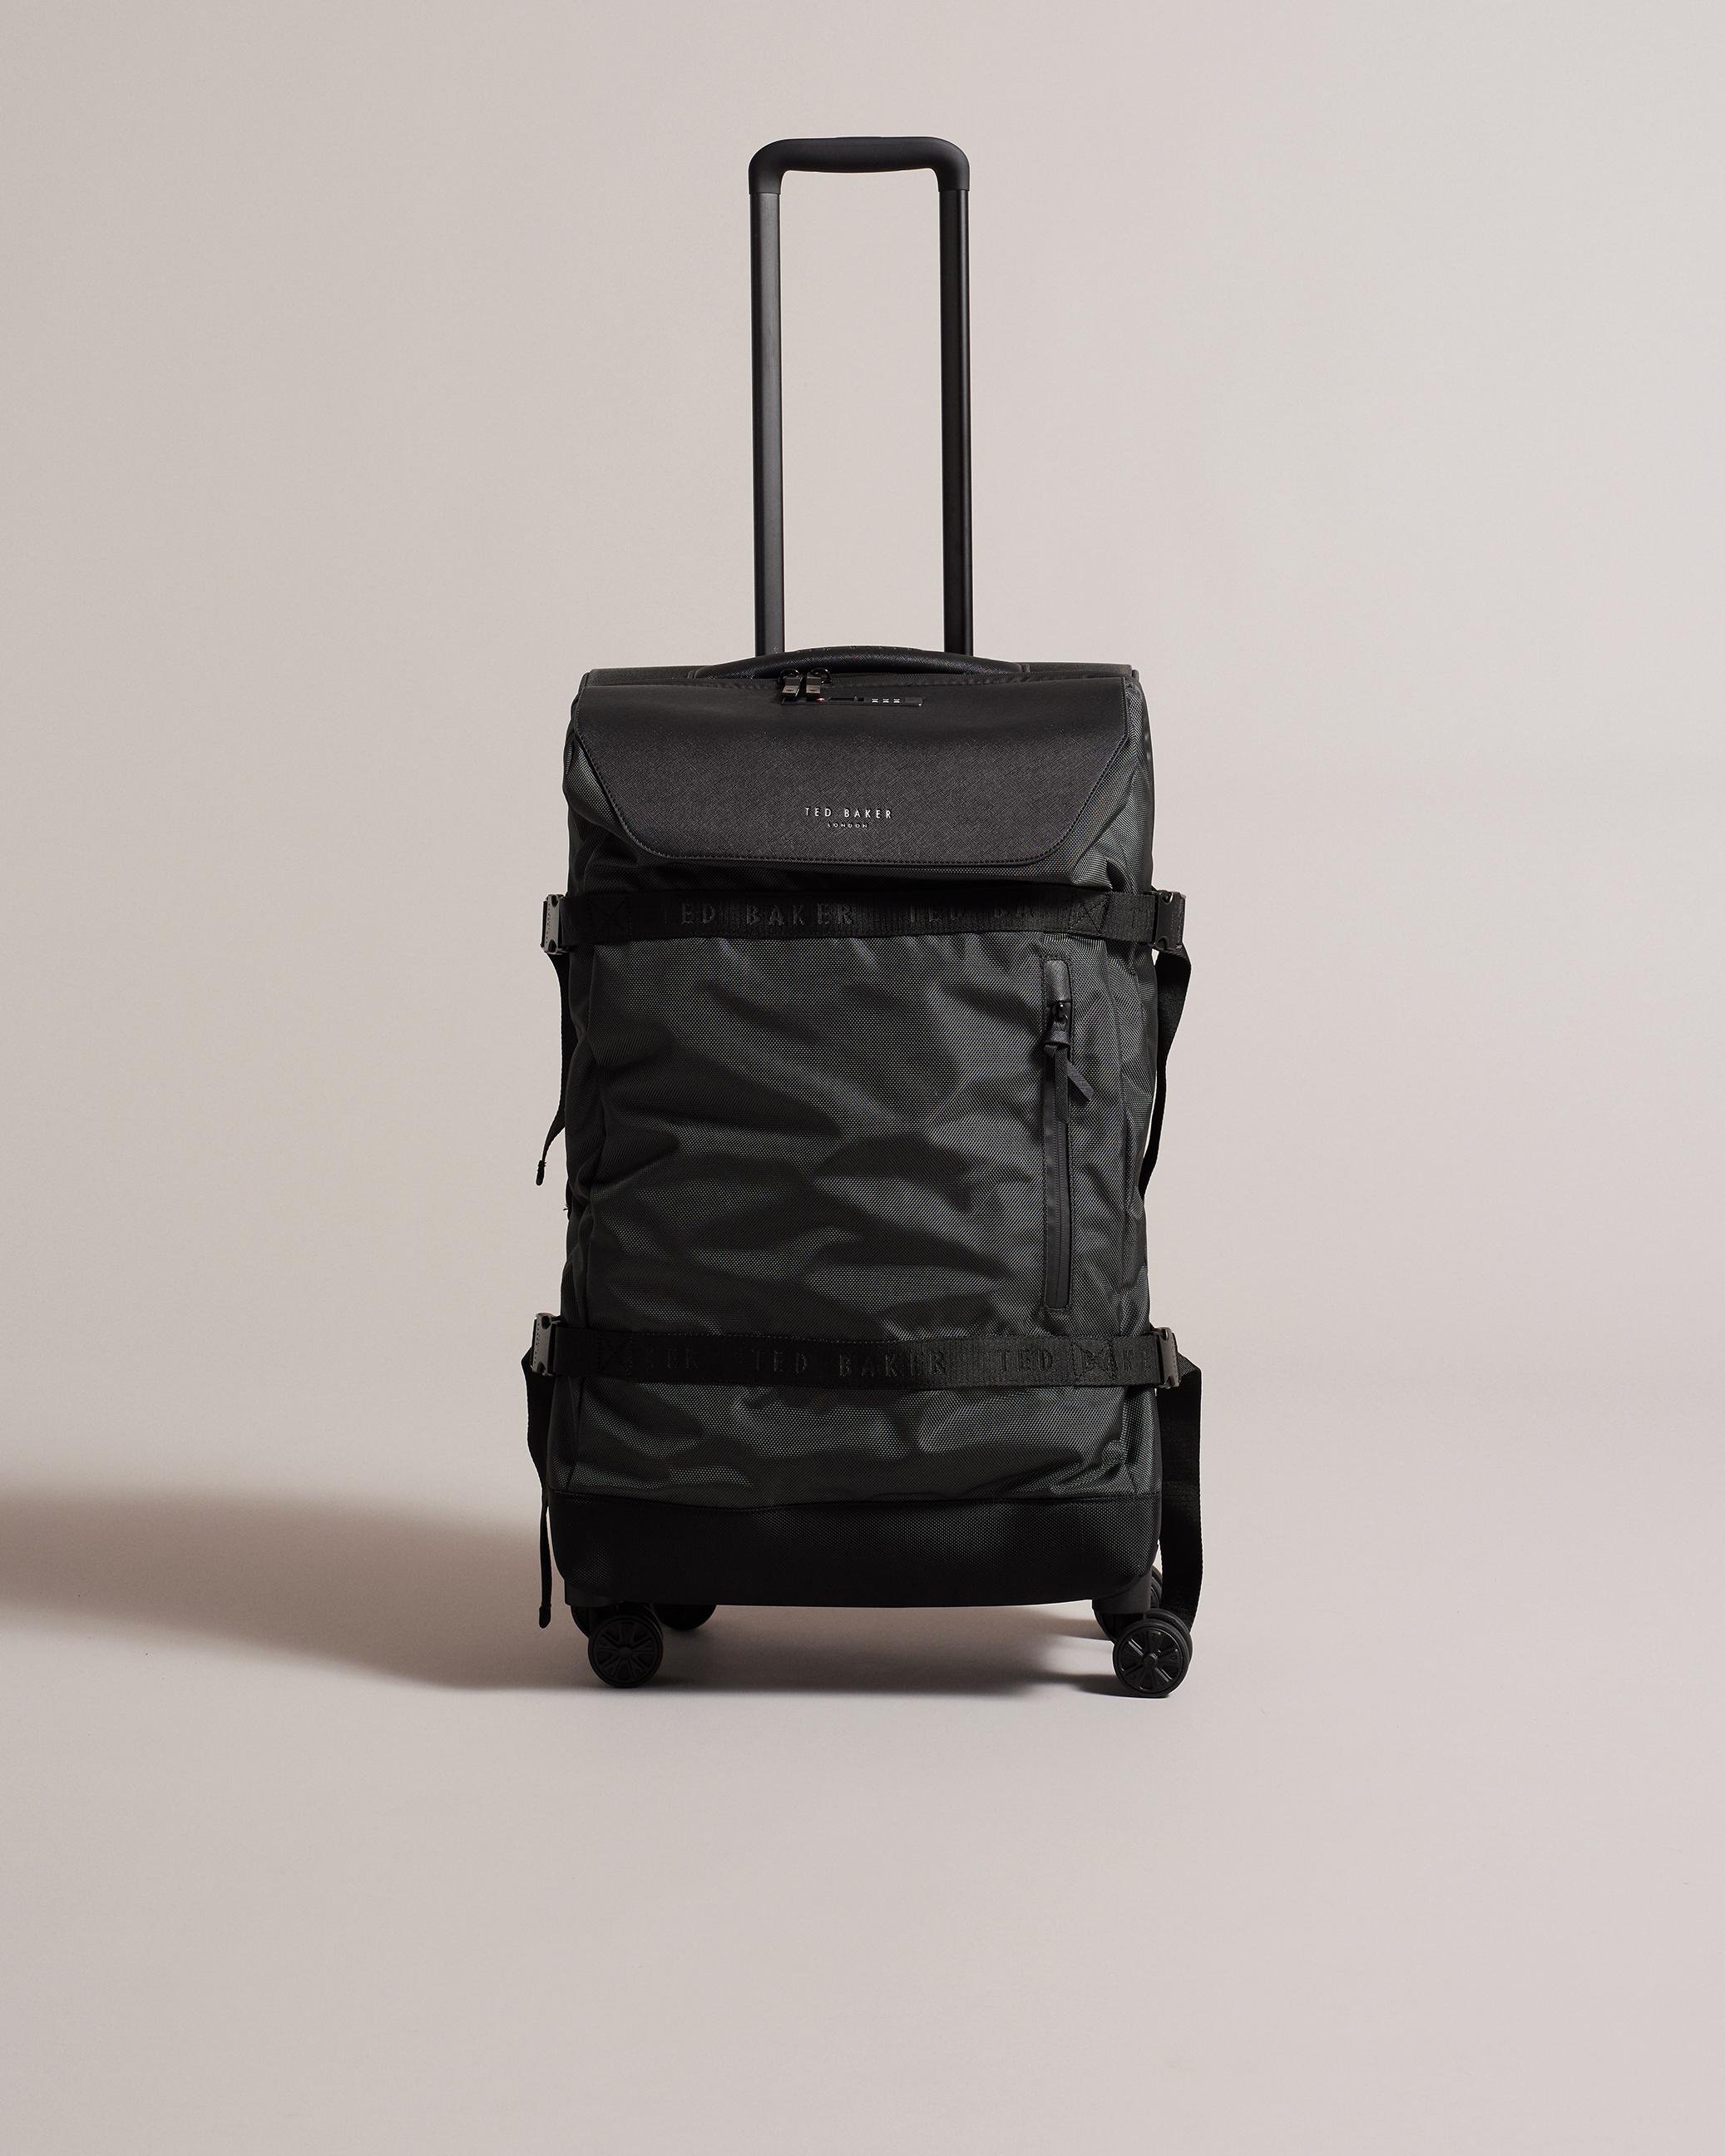 Nomad Medium Four Wheel Suitcase - NORMNN - Charcoal by TED BAKER